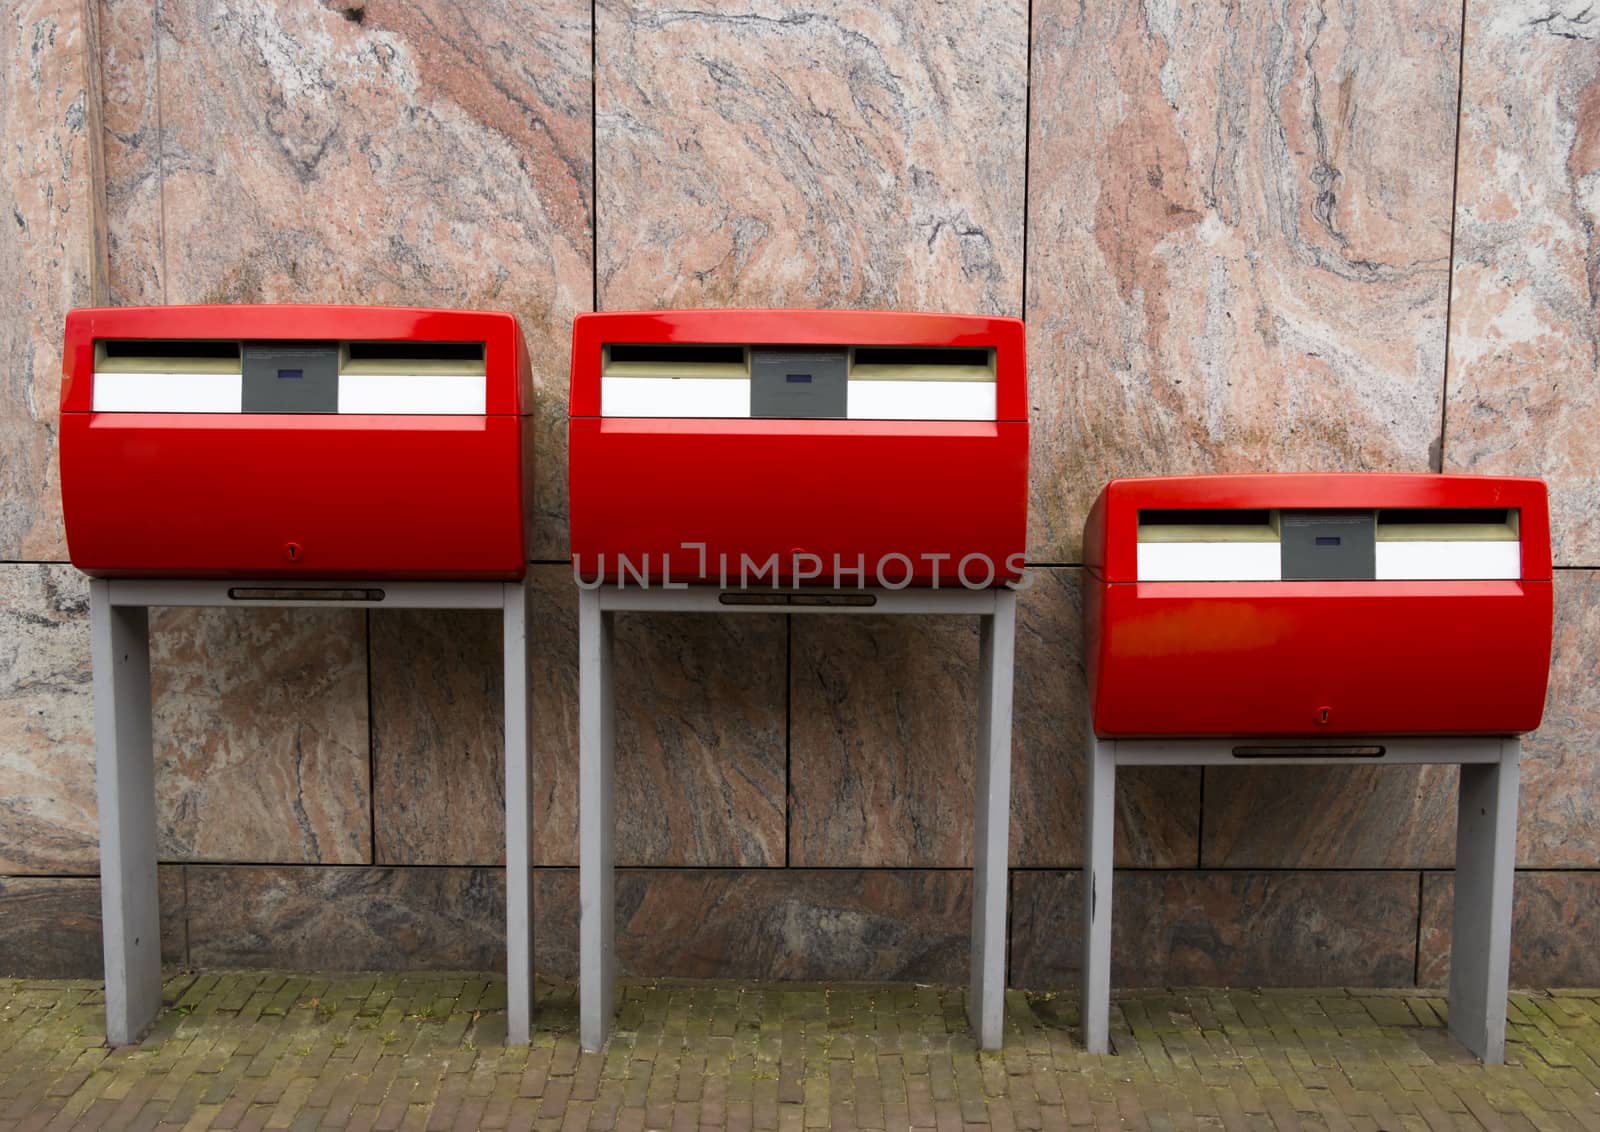 Three red public mailboxes with two slots, common in the Netherlands